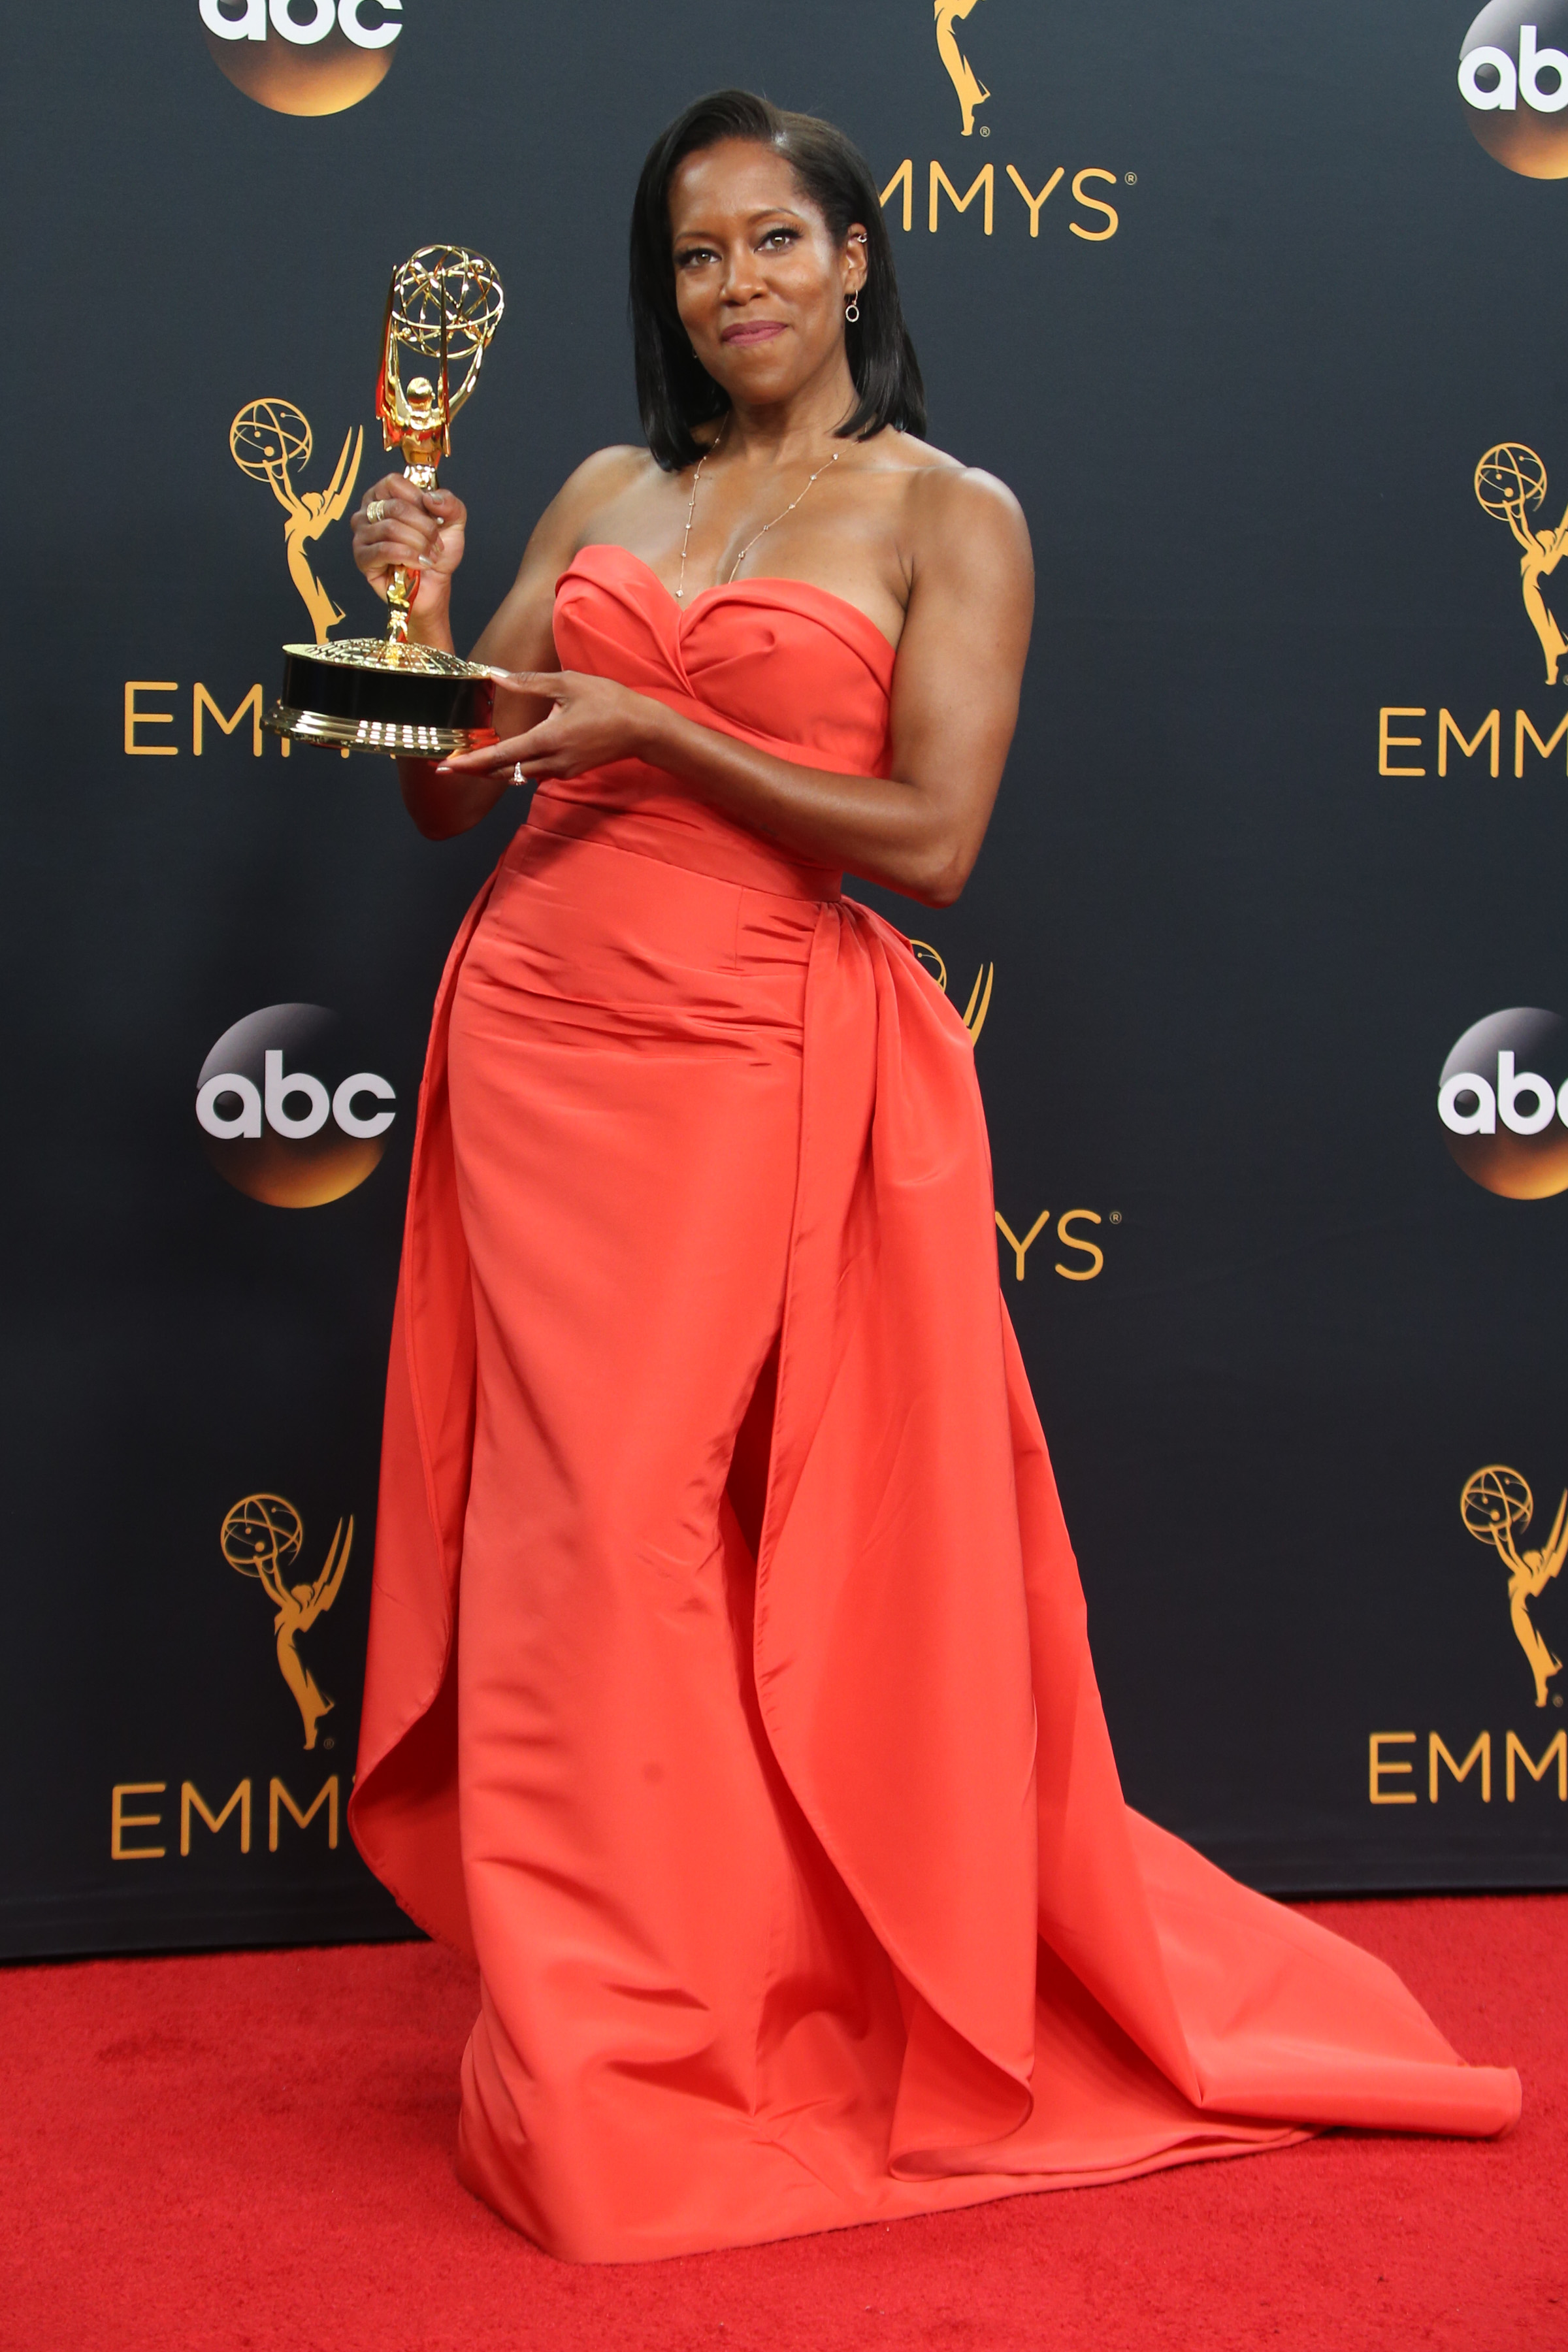 68th Annual Primetime Emmy Awards - Press Room at the Microsoft Theatre Featuring: Regina King Where: Los Angeles, California, United States When: 19 Sep 2016 Credit: FayesVision/WENN.com